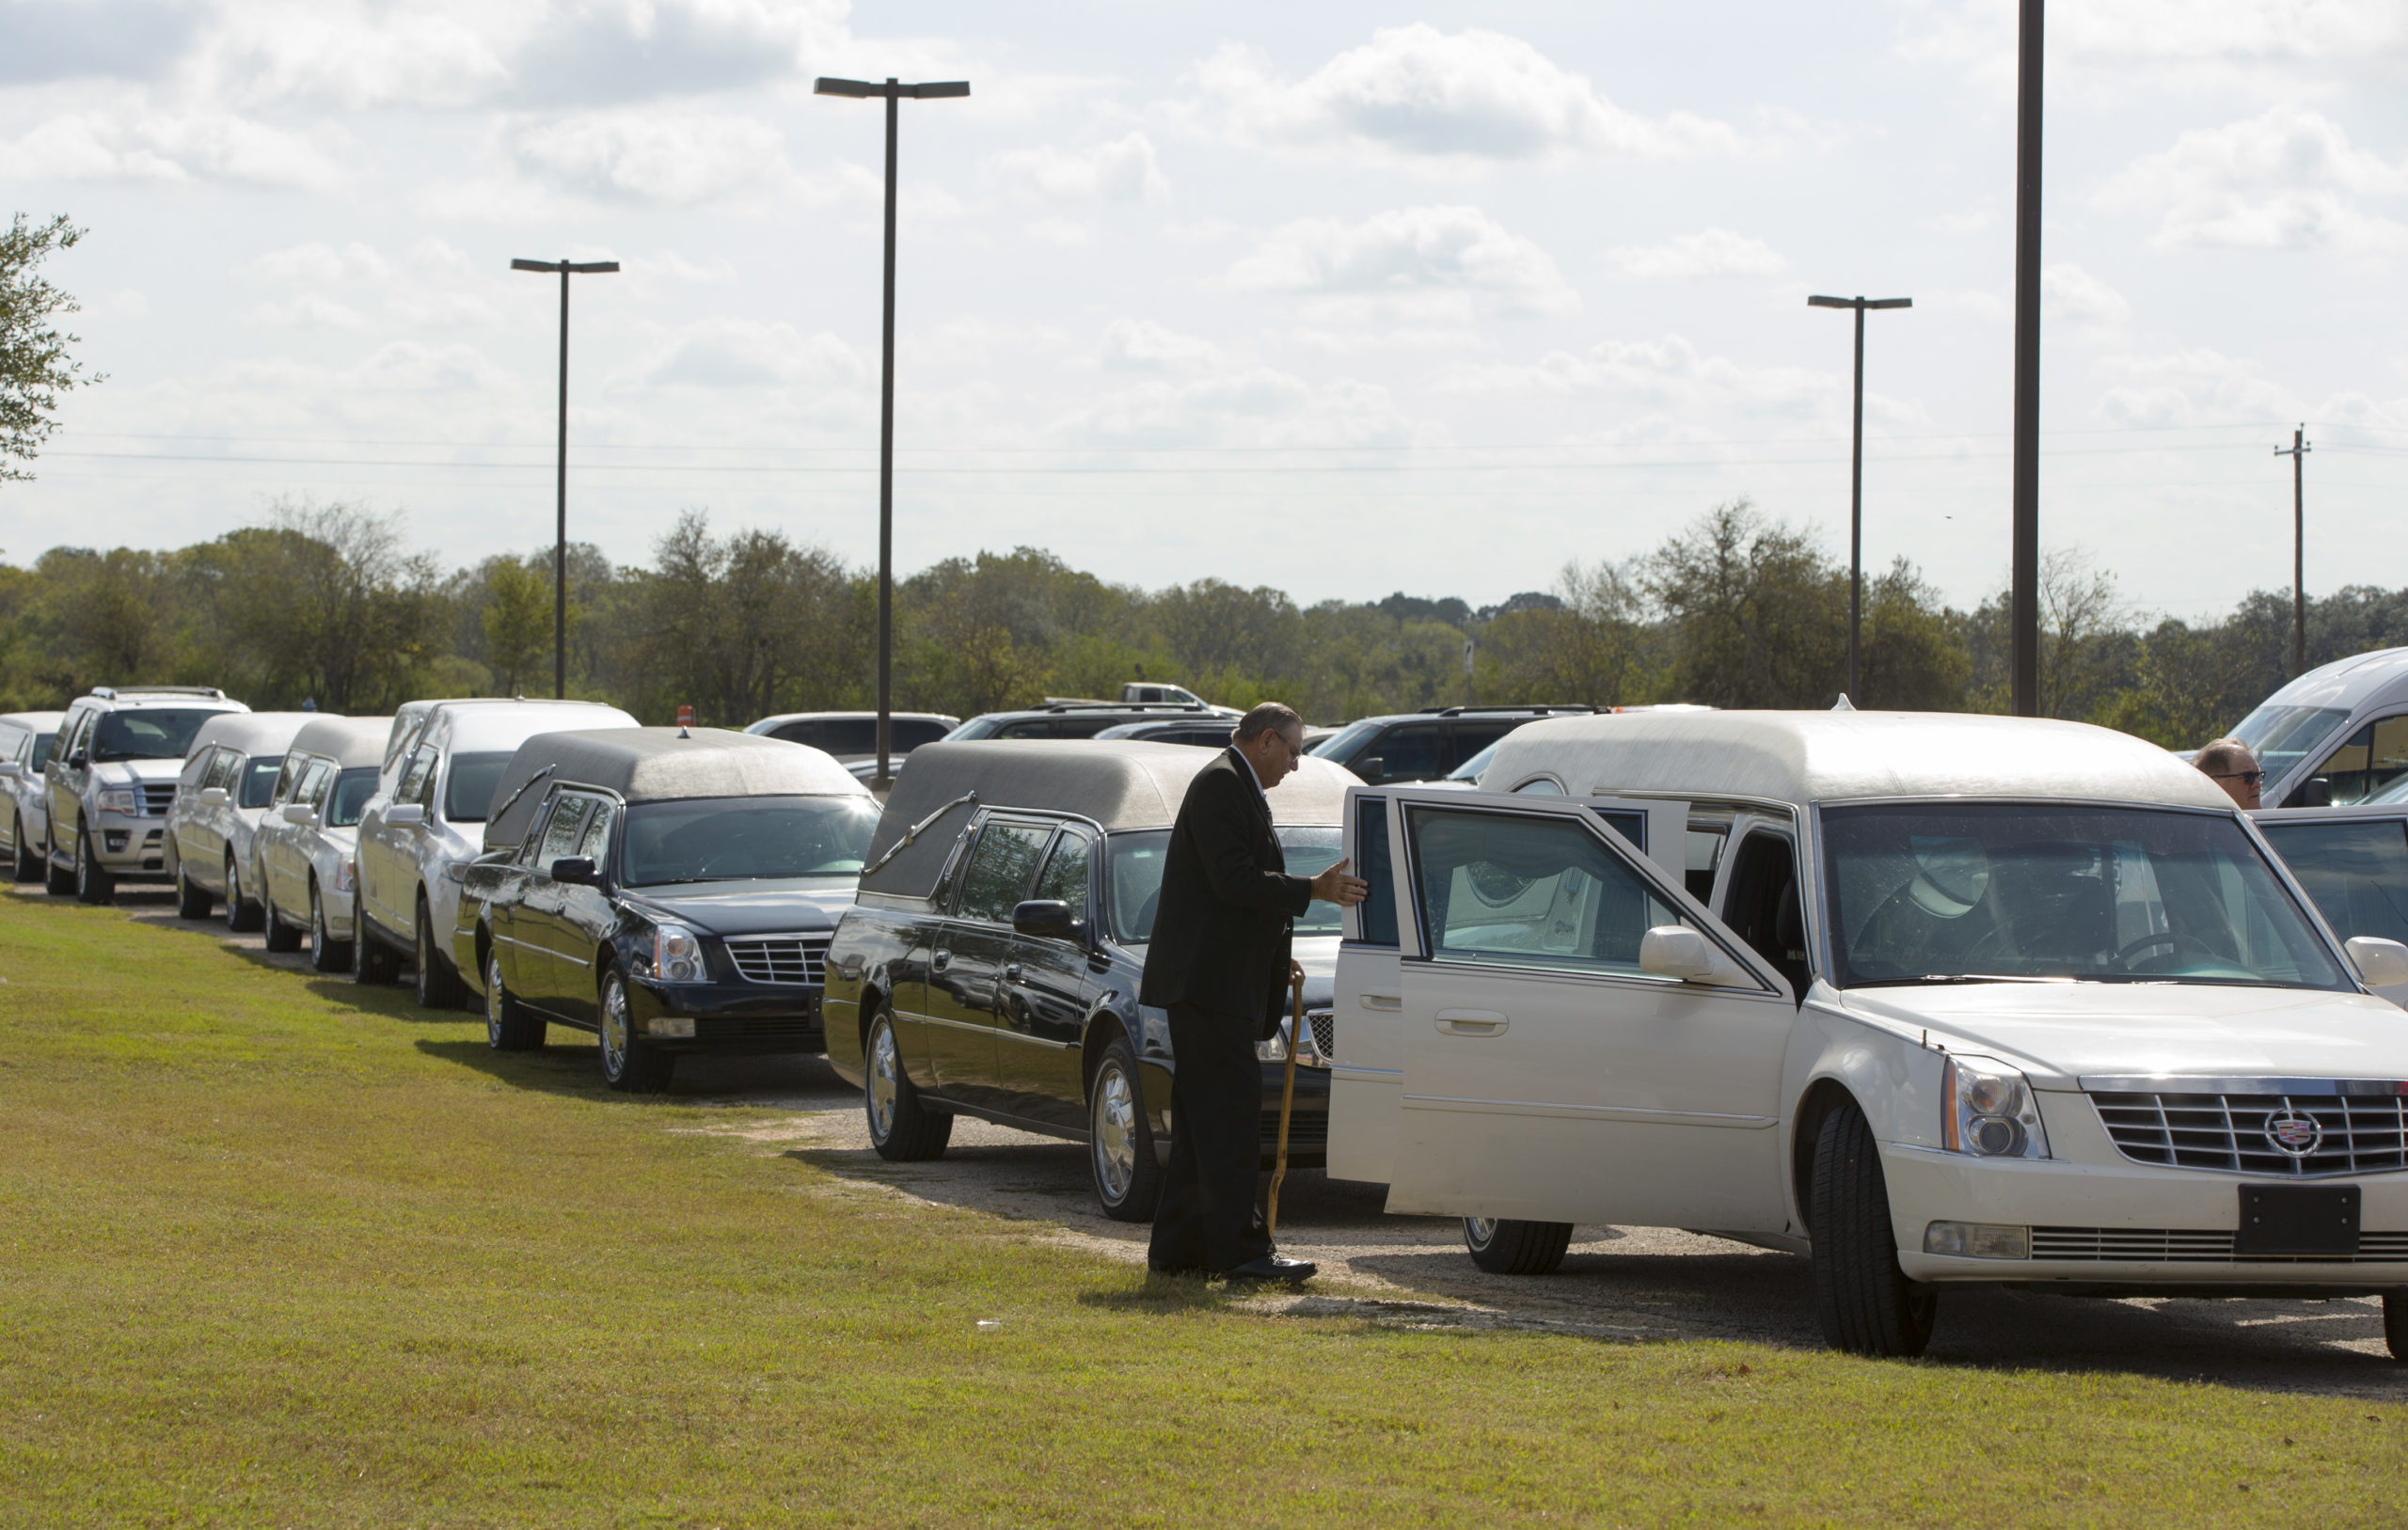 FLORESVILLE, TX - NOVEMBER 15: Hearses line up for the memorial service held at the Floresville Events Center on November 15, 2017 in Floresville, Texas for the nine members of the Holcombe family killed in the Sutherland Springs church shooting. 26 people were killed and 20 others wounded when Devin Patrick Kelley opened fire during Sunday service at the church on November 5th. (Photo by Erich Schlegel/Getty Images)